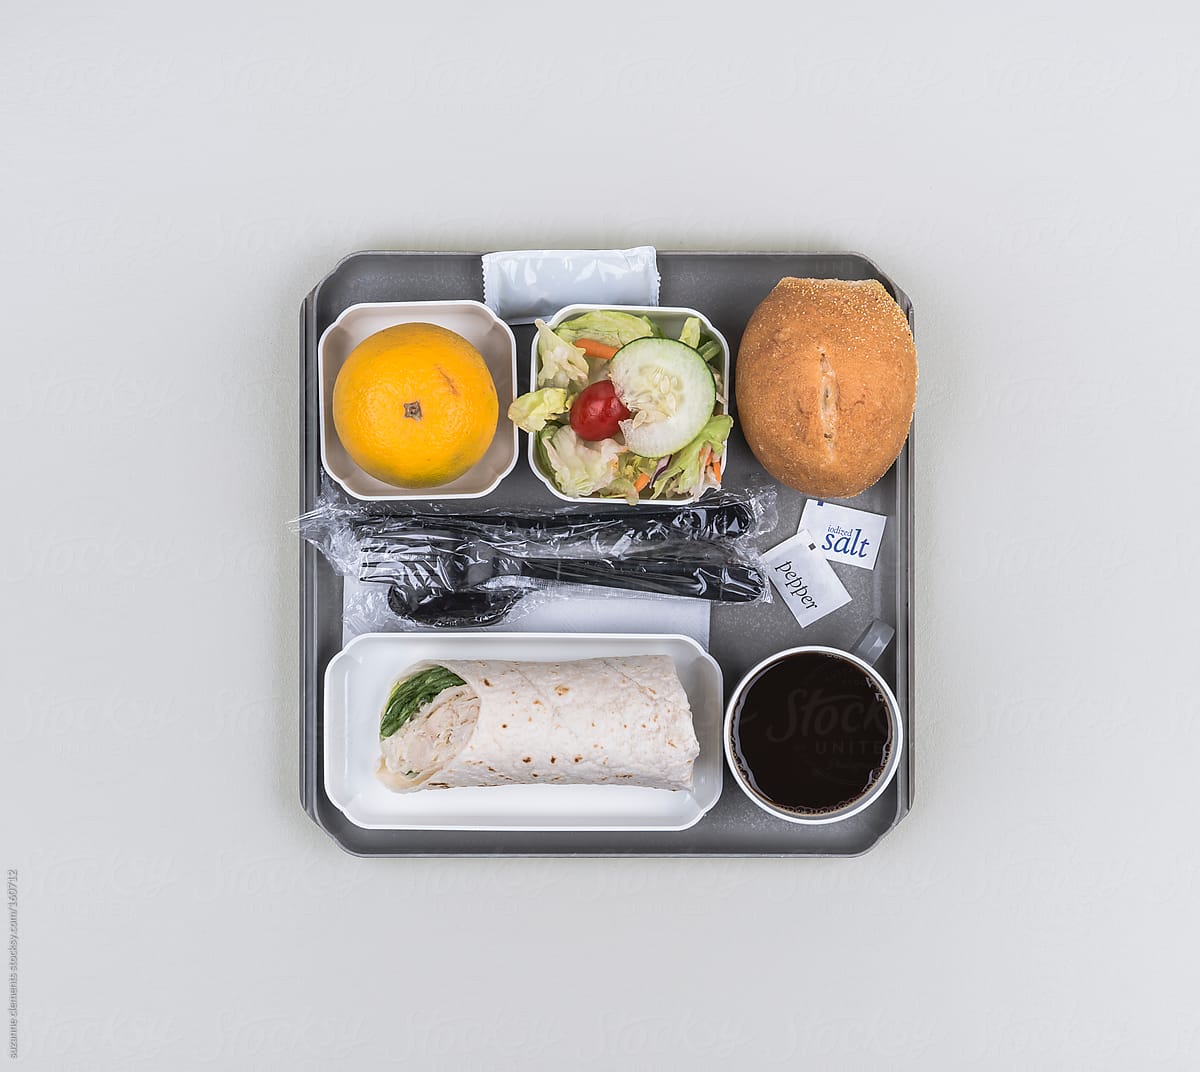 This Airline Lunch Only Looks Good When You\'re Trapped on a Long Fligh